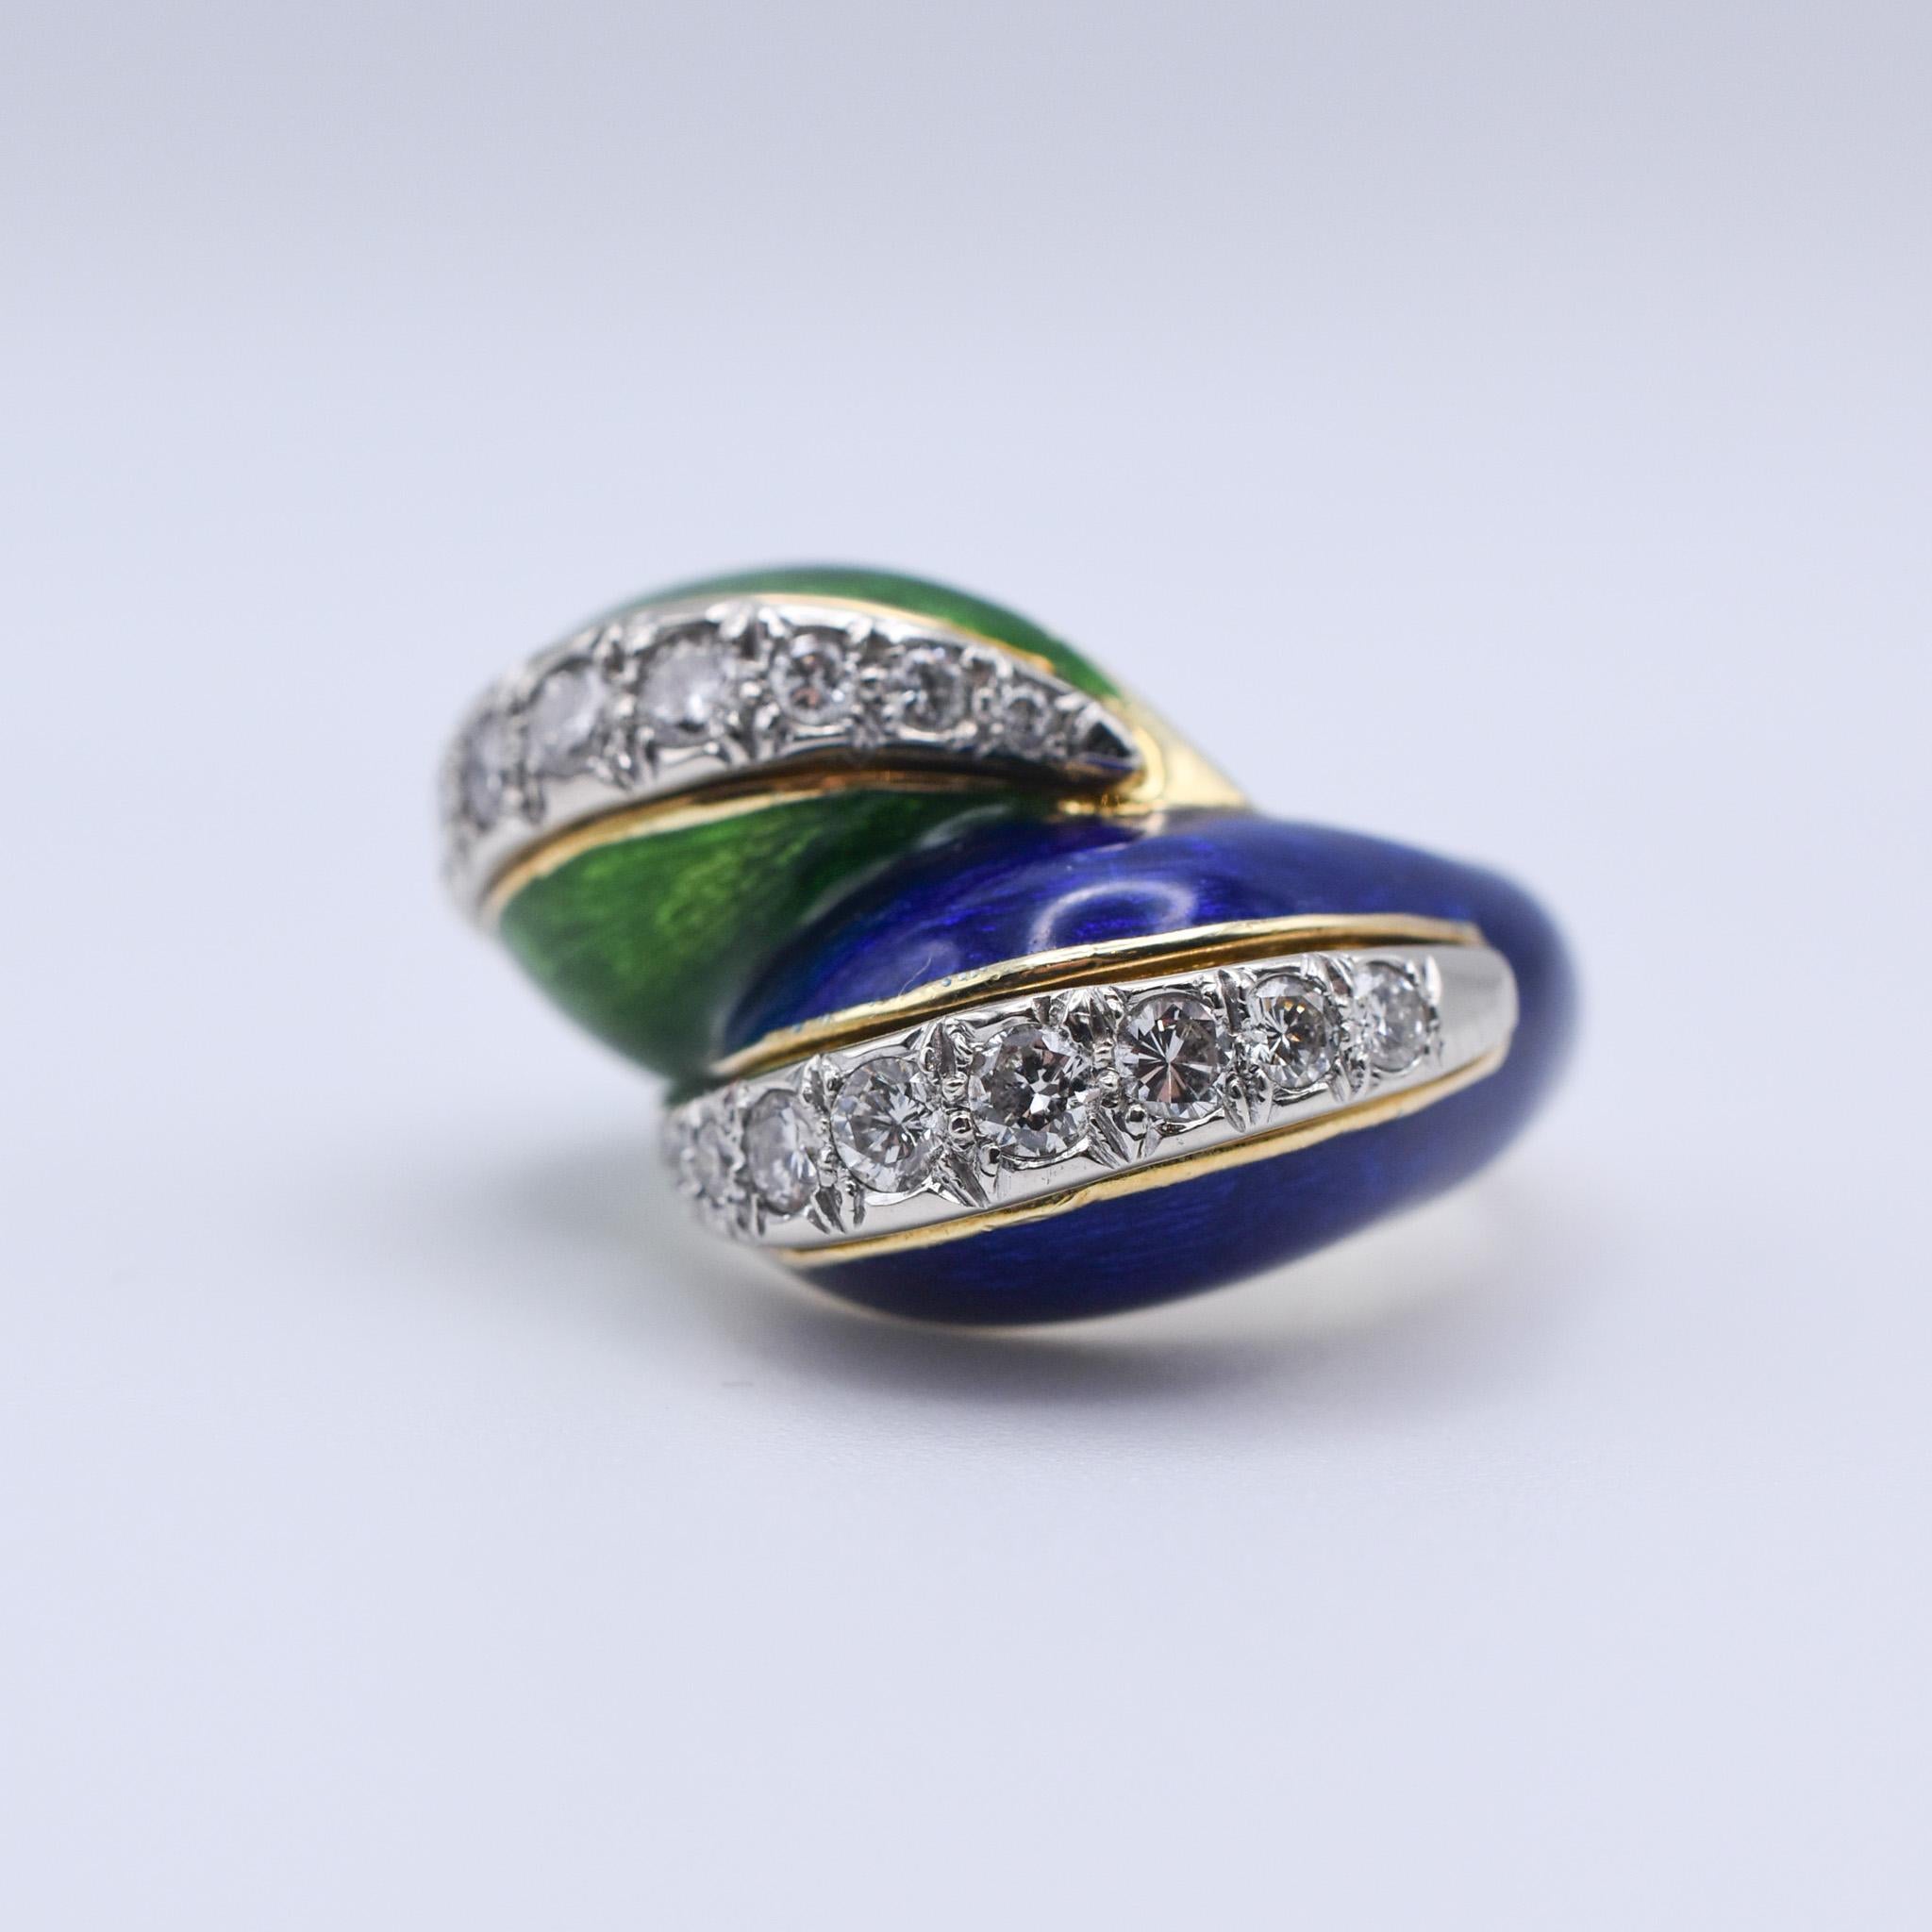 An exquisite Tiffany & Co. Paillonné twist ring in 18kt yellow gold with green and blue enamel, and round brilliant cut diamonds.  Circa 1960.